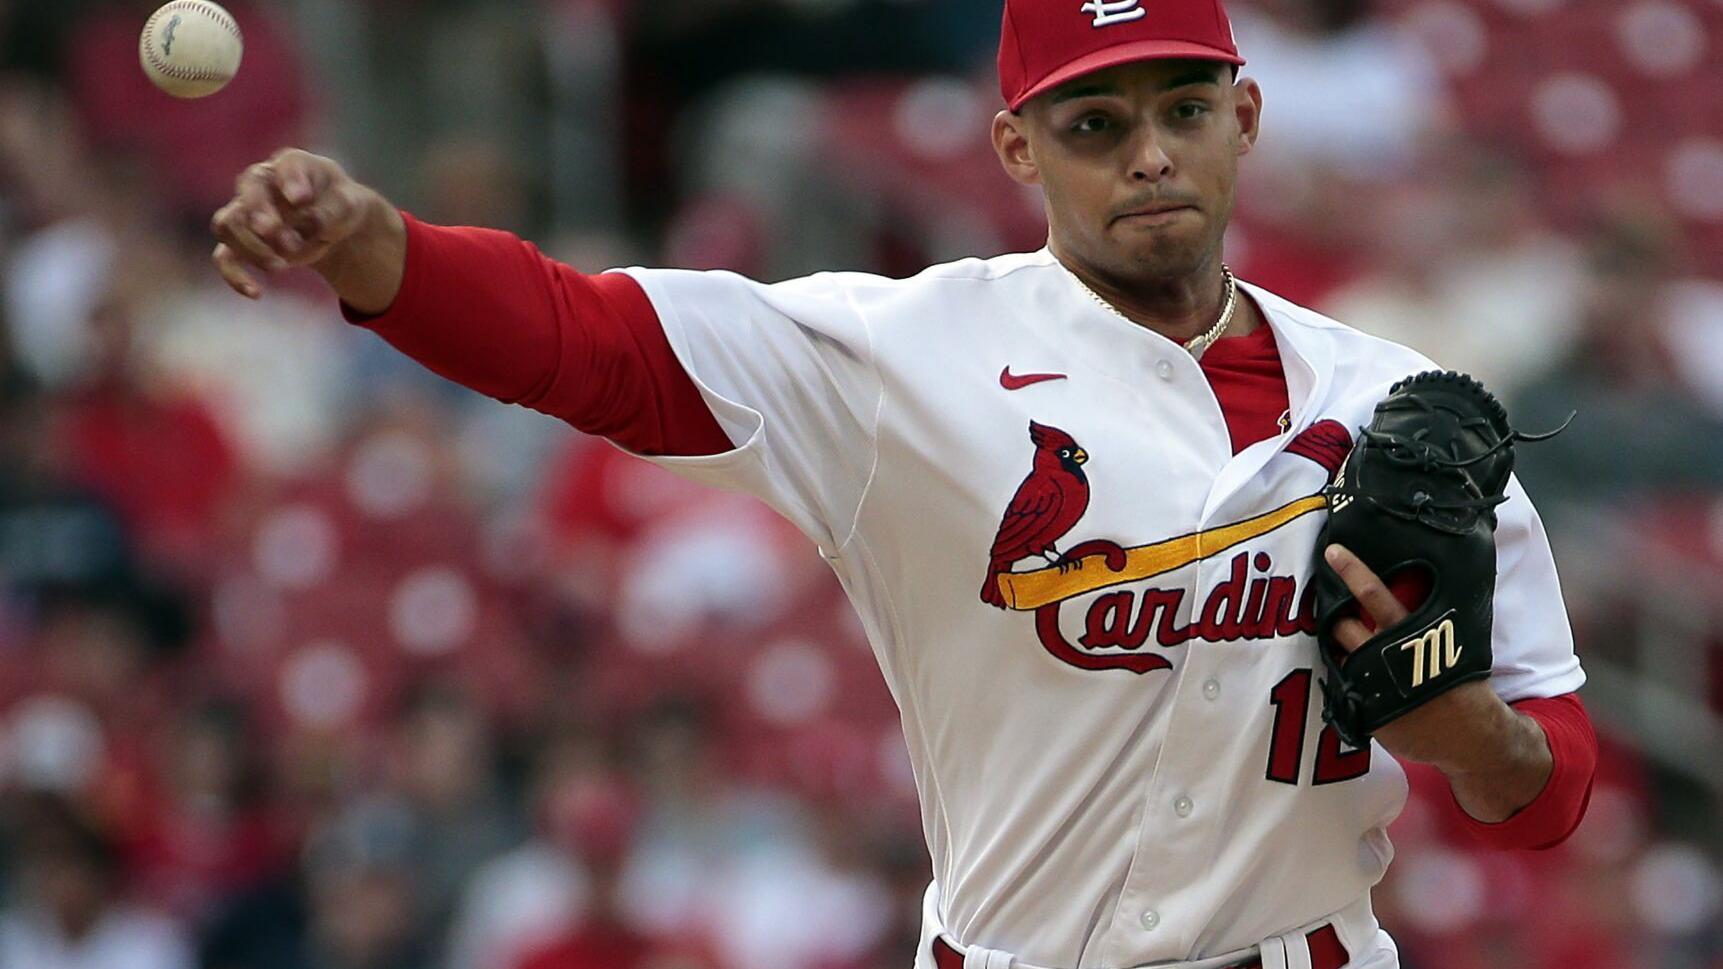 Woodford, Naughton are options if struggling Hicks goes back to Cardinals' bullpen